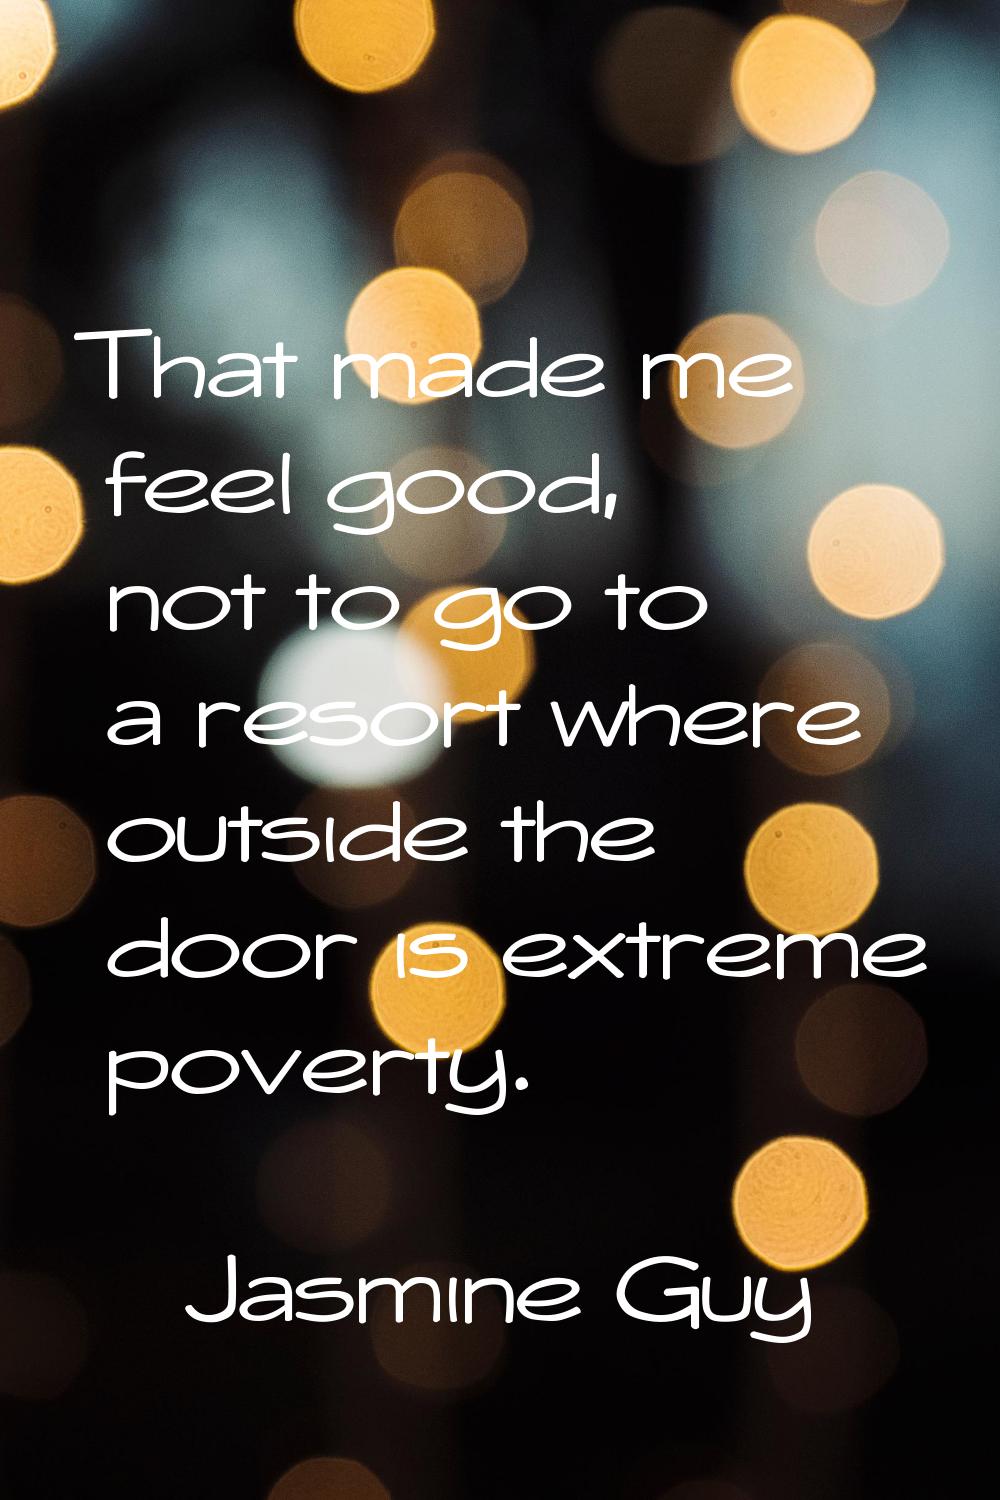 That made me feel good, not to go to a resort where outside the door is extreme poverty.